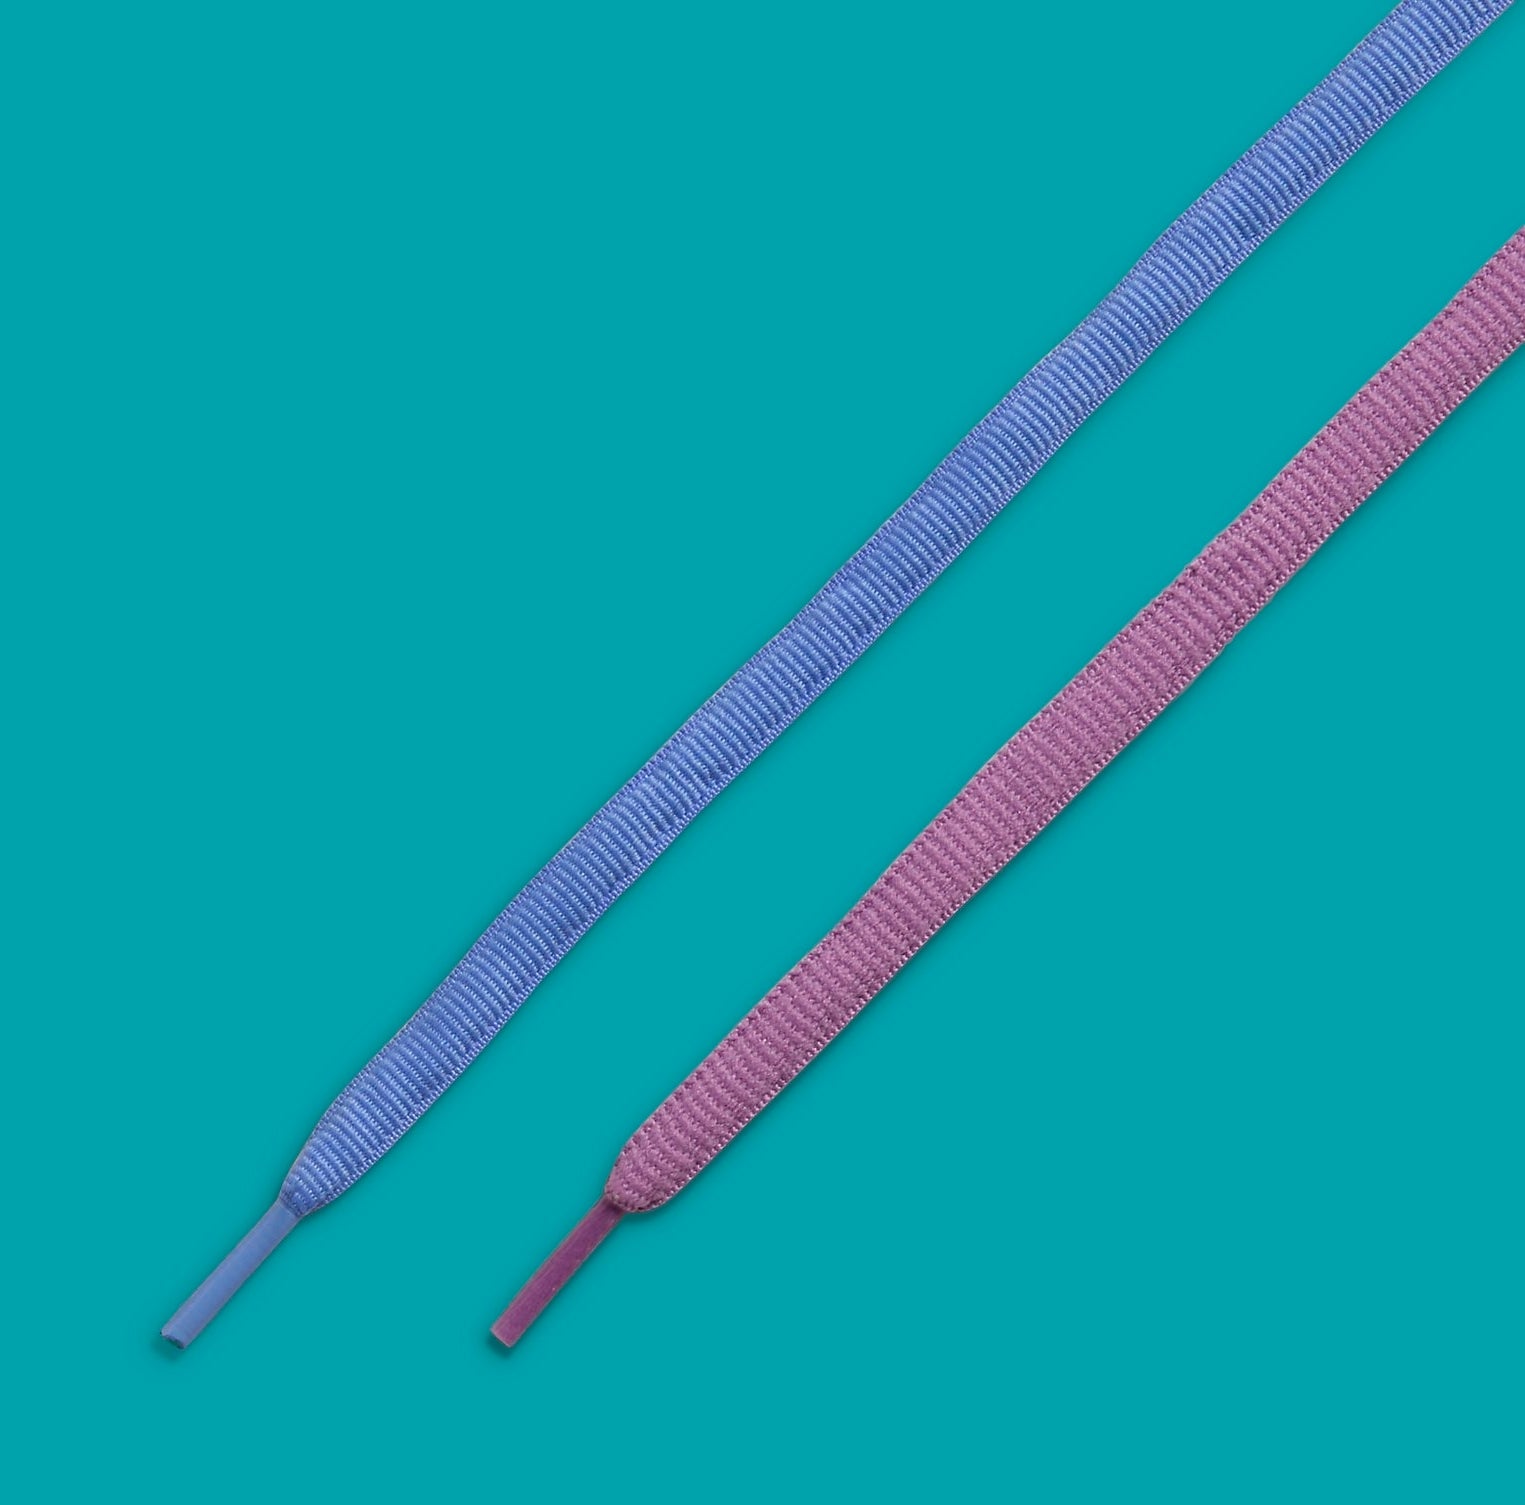 Two shoelaces against a teal background, related to sneaker fashion